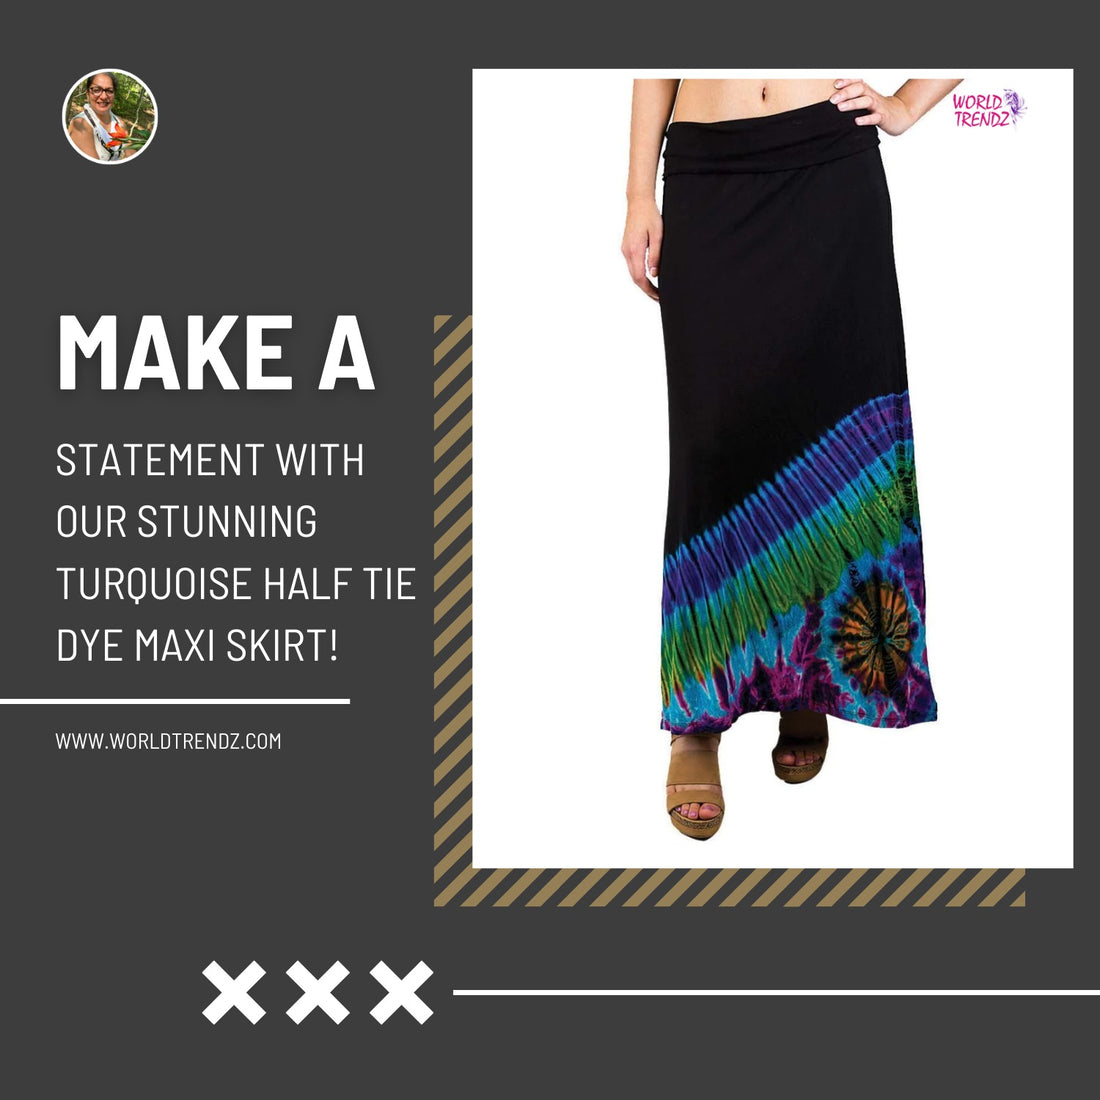 Turquoise Half Tie Dye Maxi Skirt: The Must-Have Vibrant Style Dress